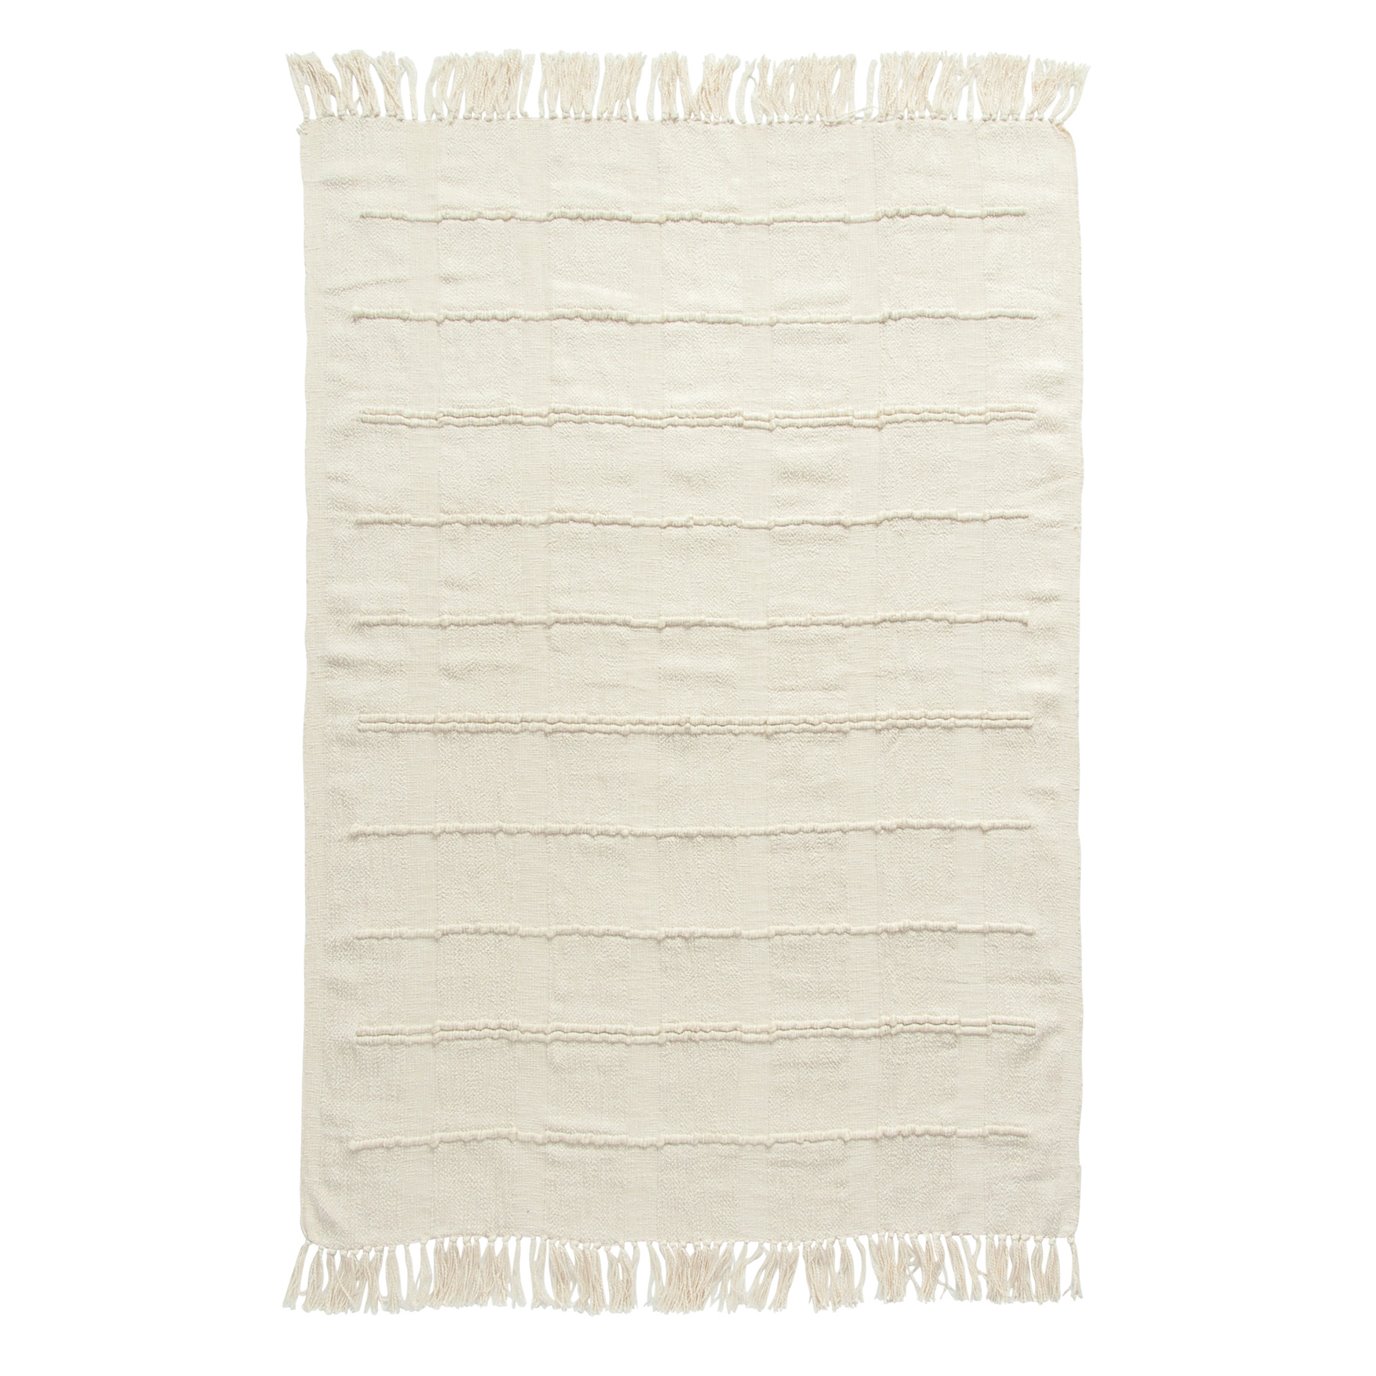 Cream Cotton Blend Chenille Throw with Fringe